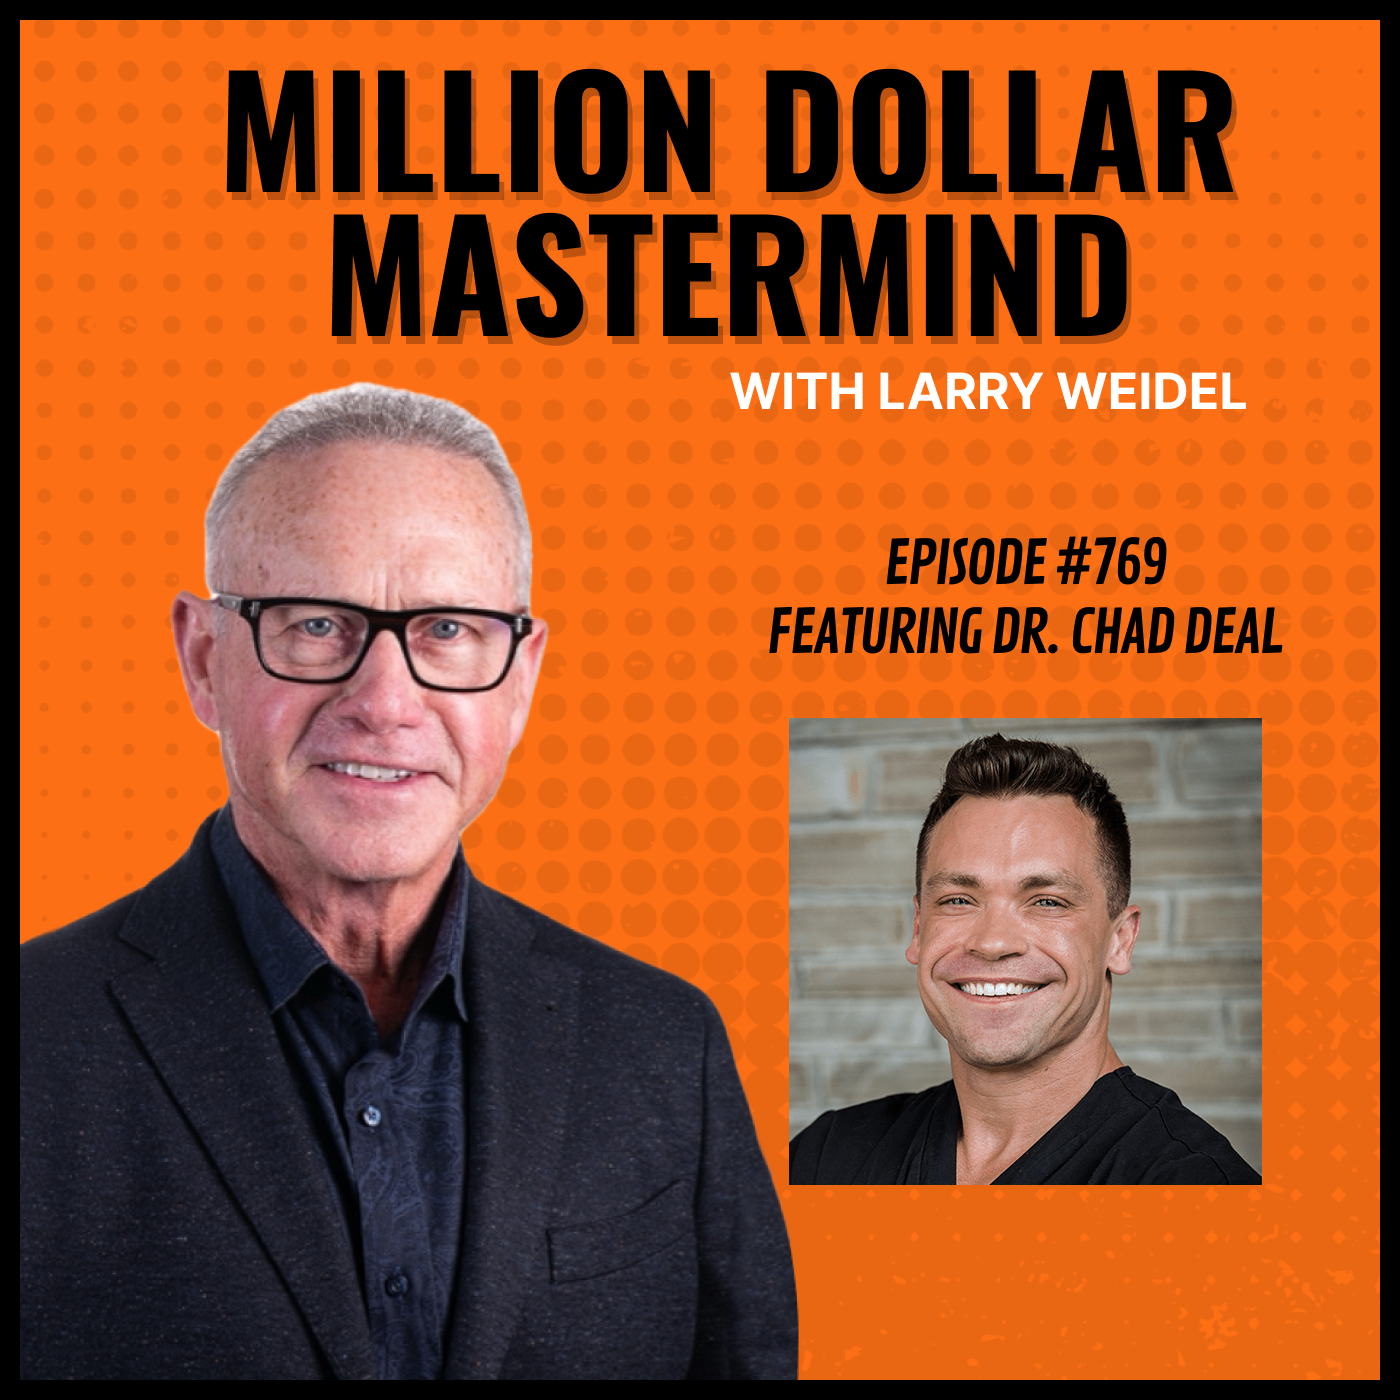 Episode #769 - From Humble Beginning To 18,000 Cosmetic Surgeries with Dr. Chad Deal